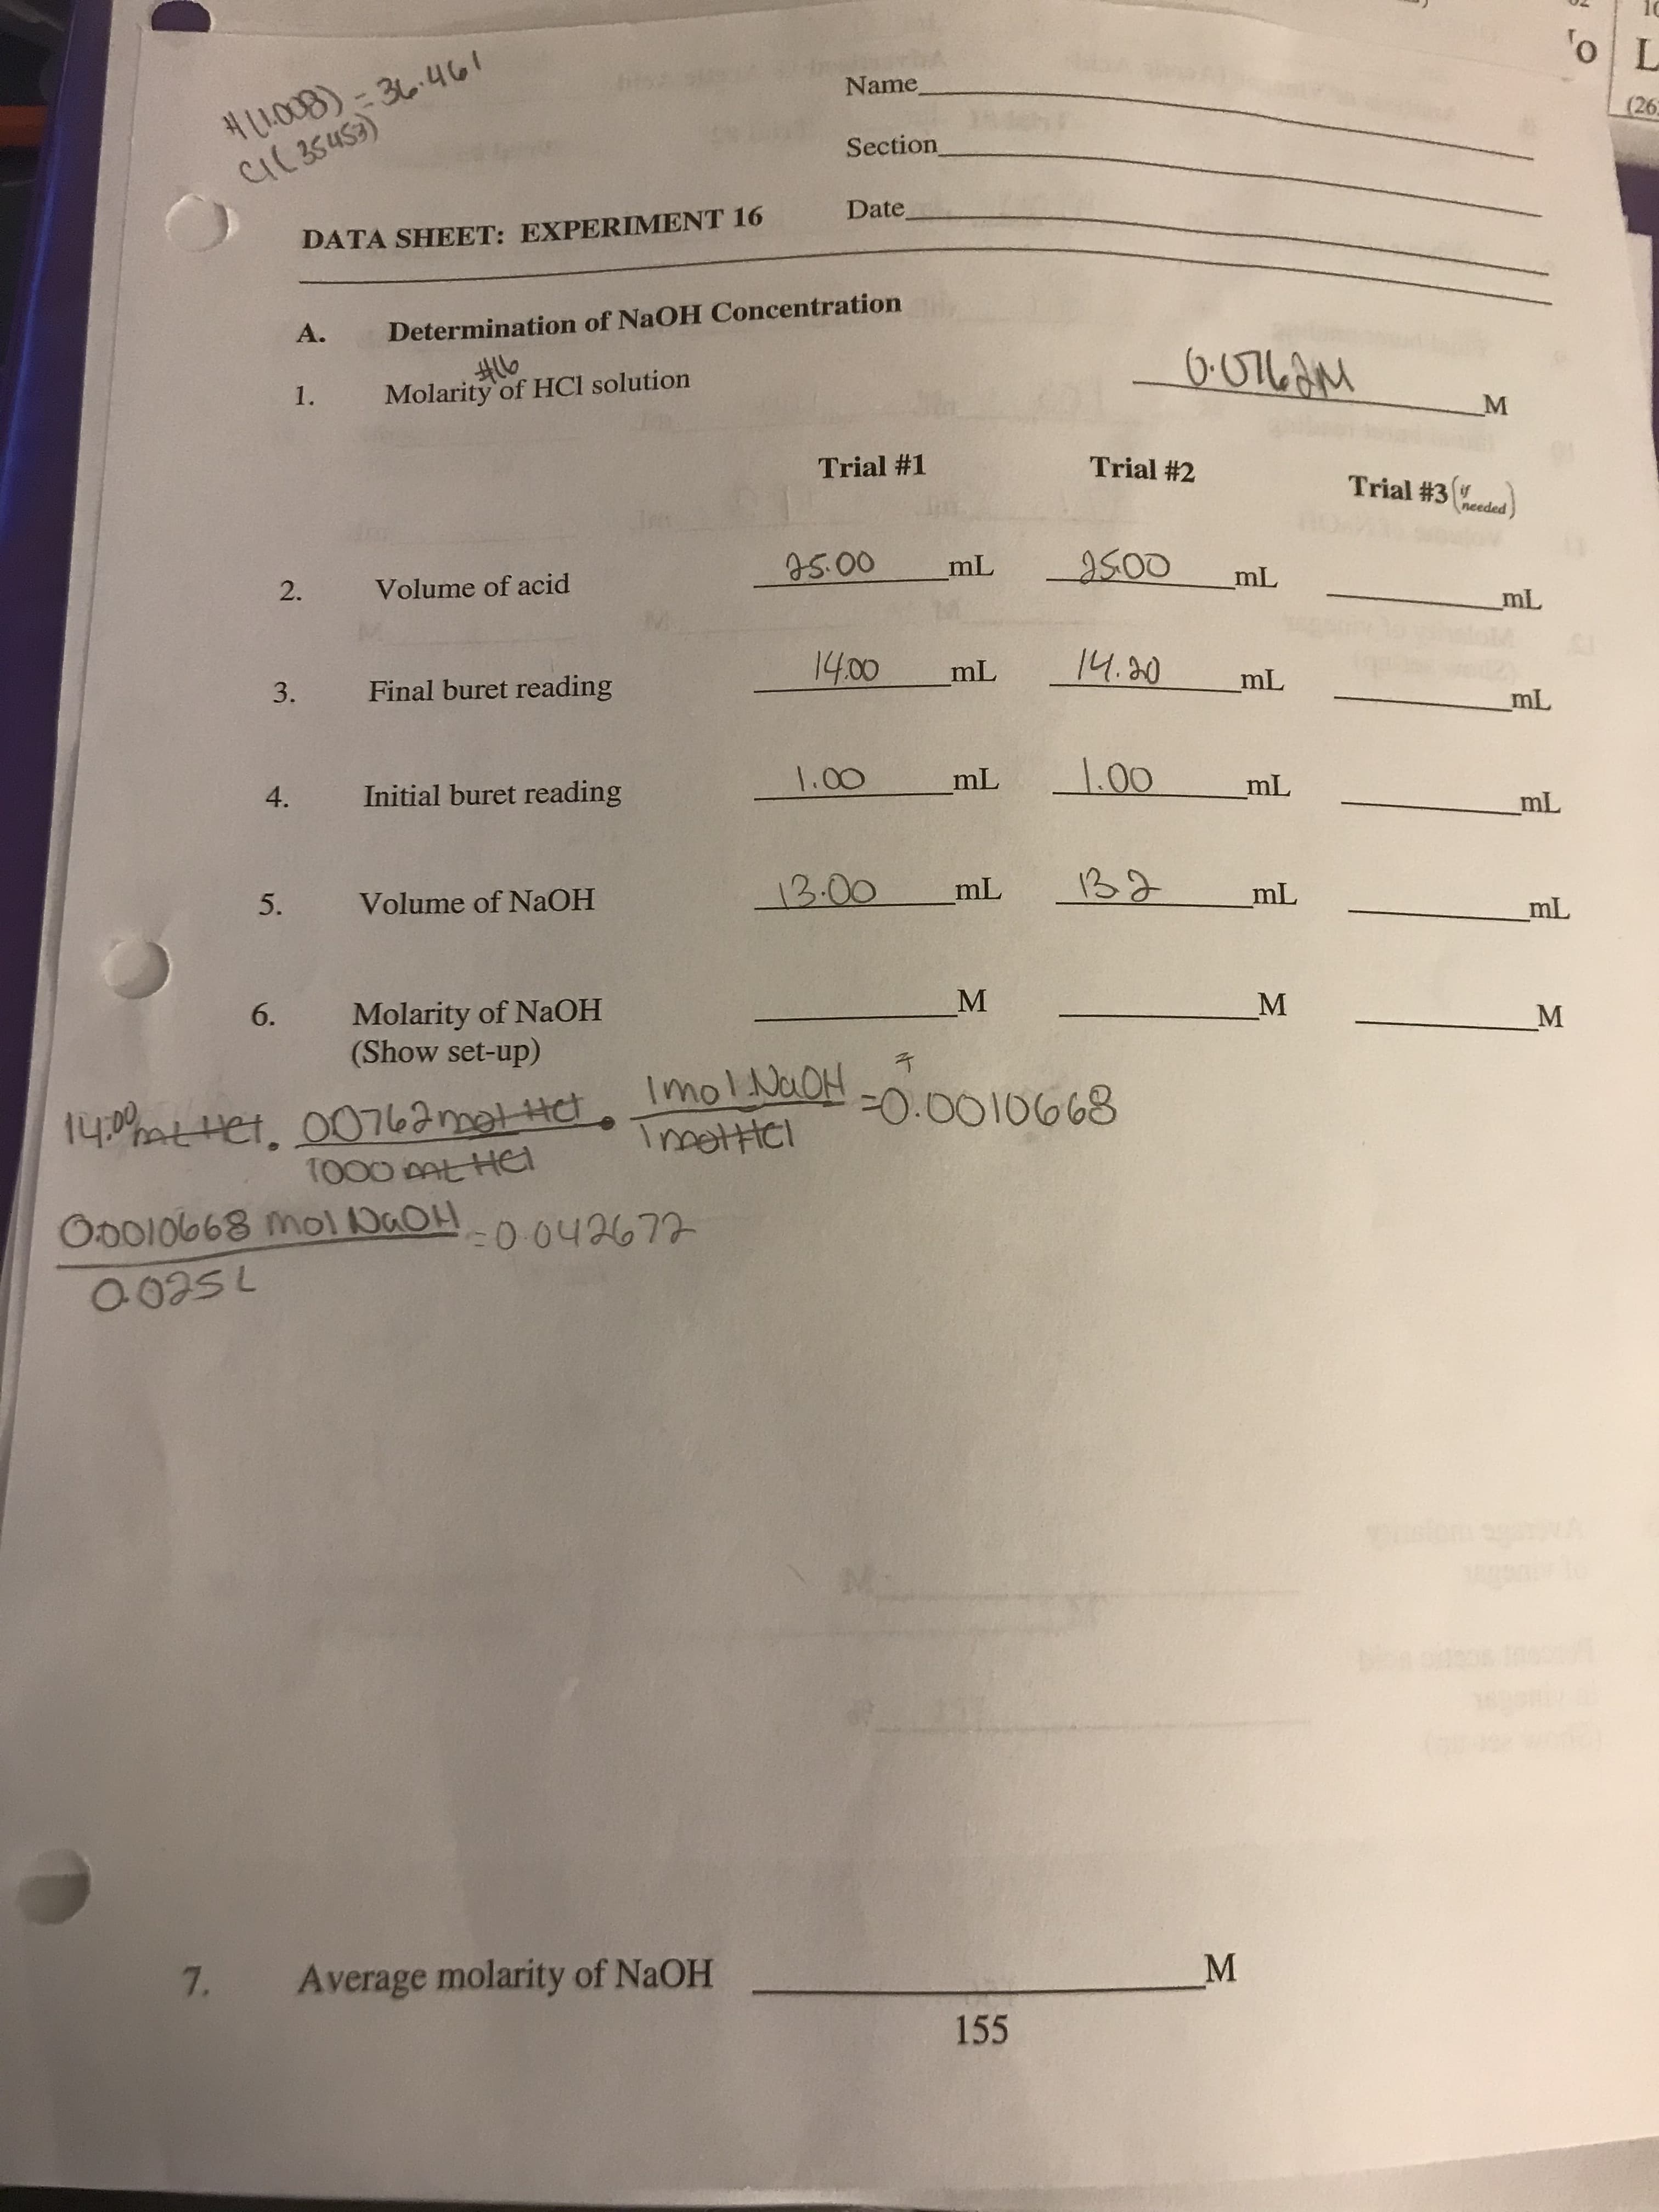 5.
Name
H1008)- 36.461
(26
Section
Date
DATA SHEET: EXPERIMENT 16
A.
Determination of NaOH Concentration
Molarity of HCI solution
Trial #1
Trial #2
Trial #3 heeded
pap
75.00
2.
Volume of acid
Tur
Final buret reading
14.20
000
Tu
Initial buret reading
4.
000
100
Tu
Volume of NAOH
13.00
Molarity of NaOH
(Show set-up)
6.
M.
Imol NaOH
HOCY 1OW 8990100
75200
7.
Average molarity of NaOH
M.
155
